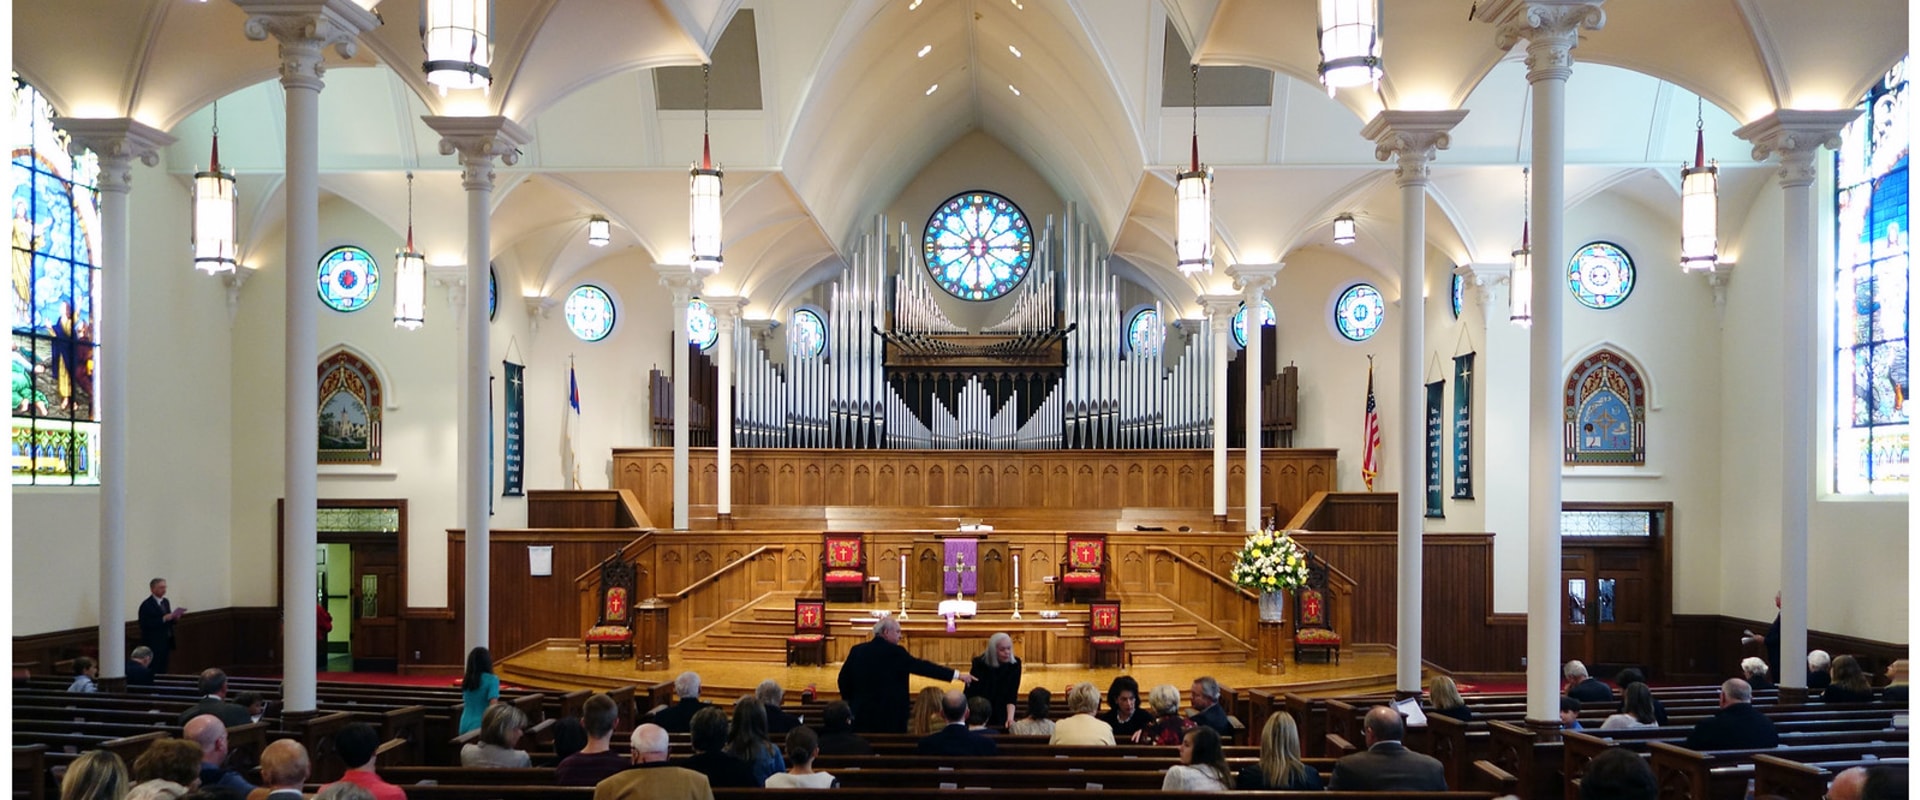 Exploring the Celebrations of Churches in Upstate South Carolina